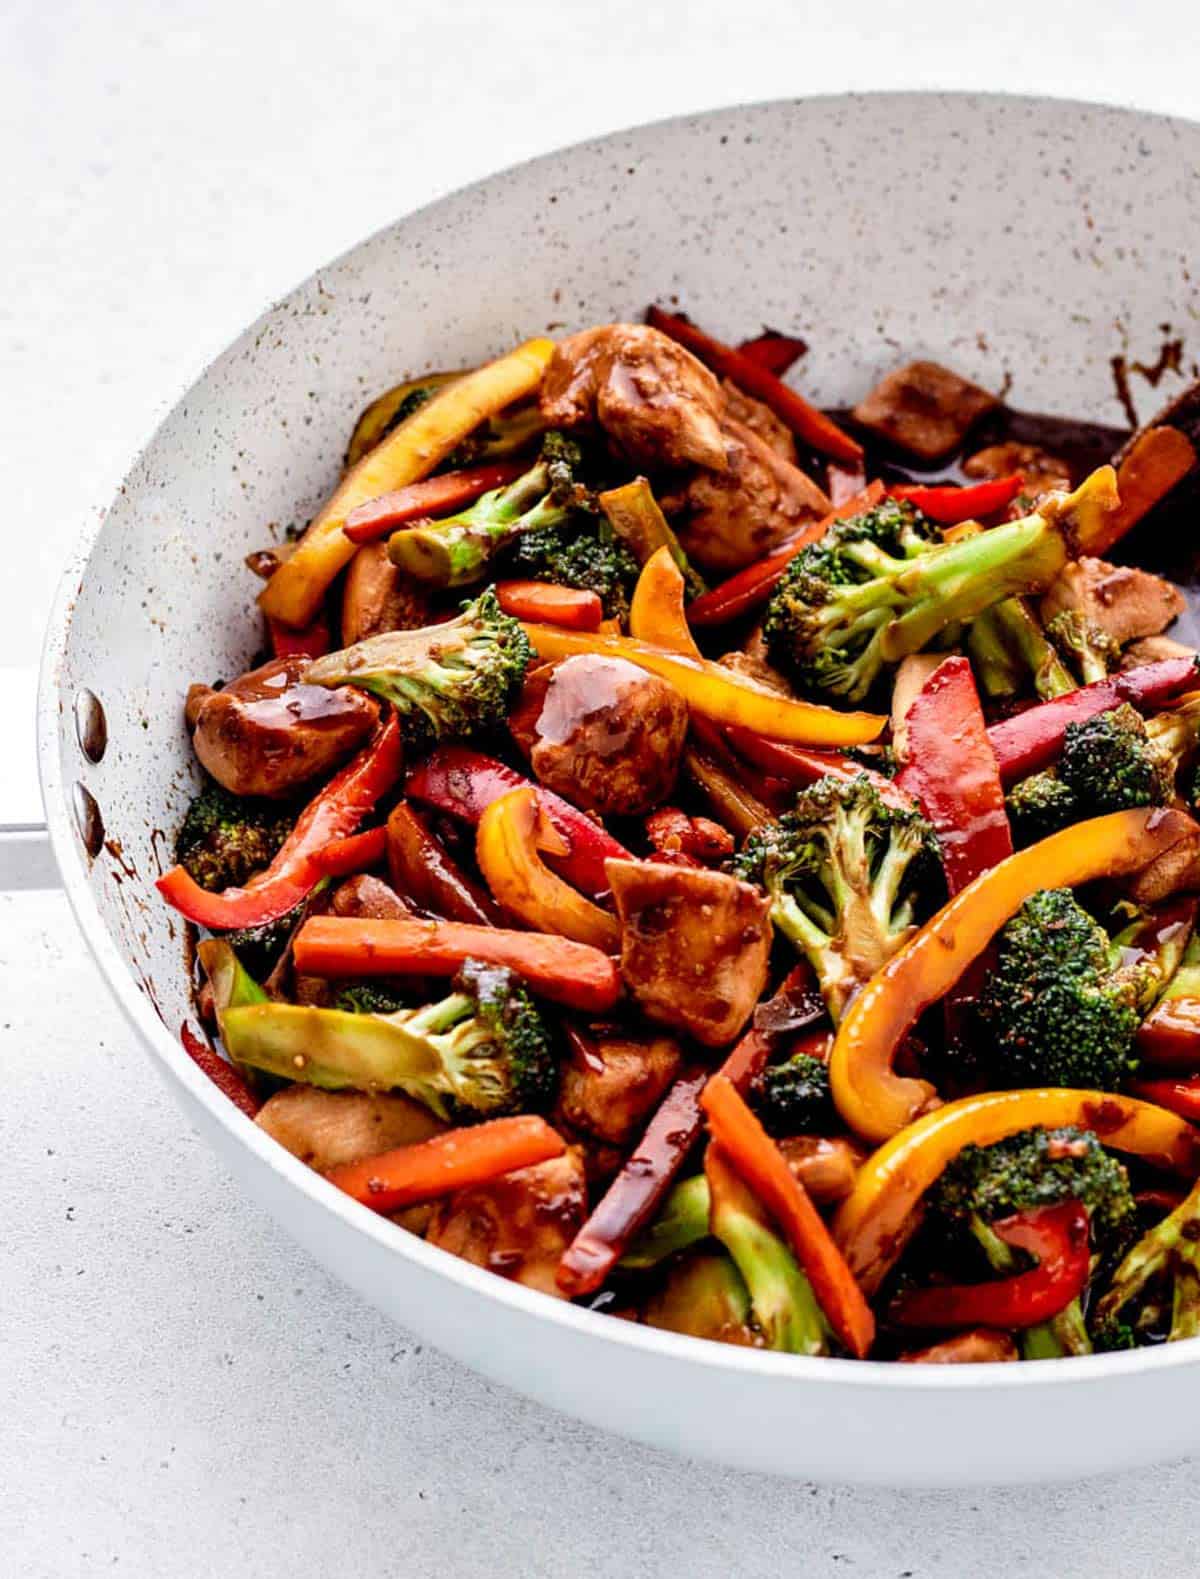 Healthy chicken and vegetable stir fry in a white frying pan.